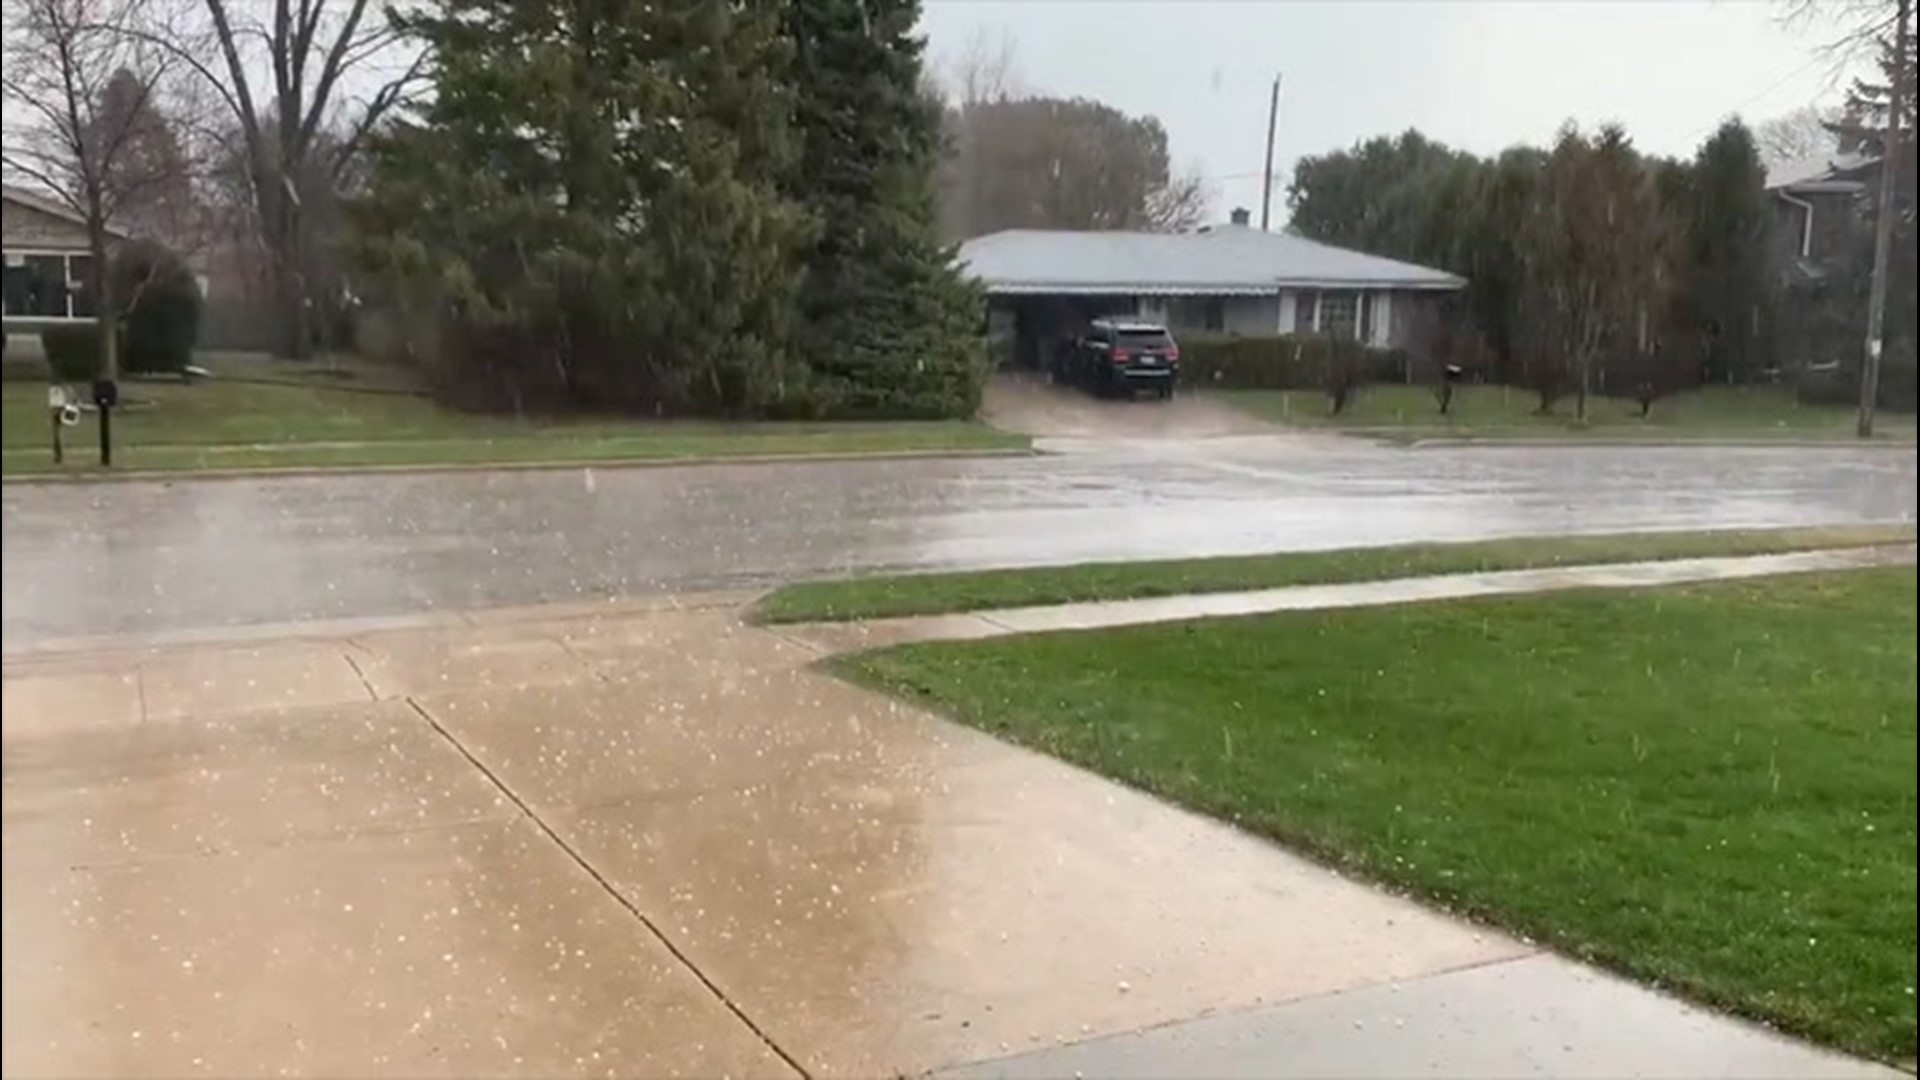 Grafton, Wisconsin, was hit with some heavy hail on Tuesday, April 7.